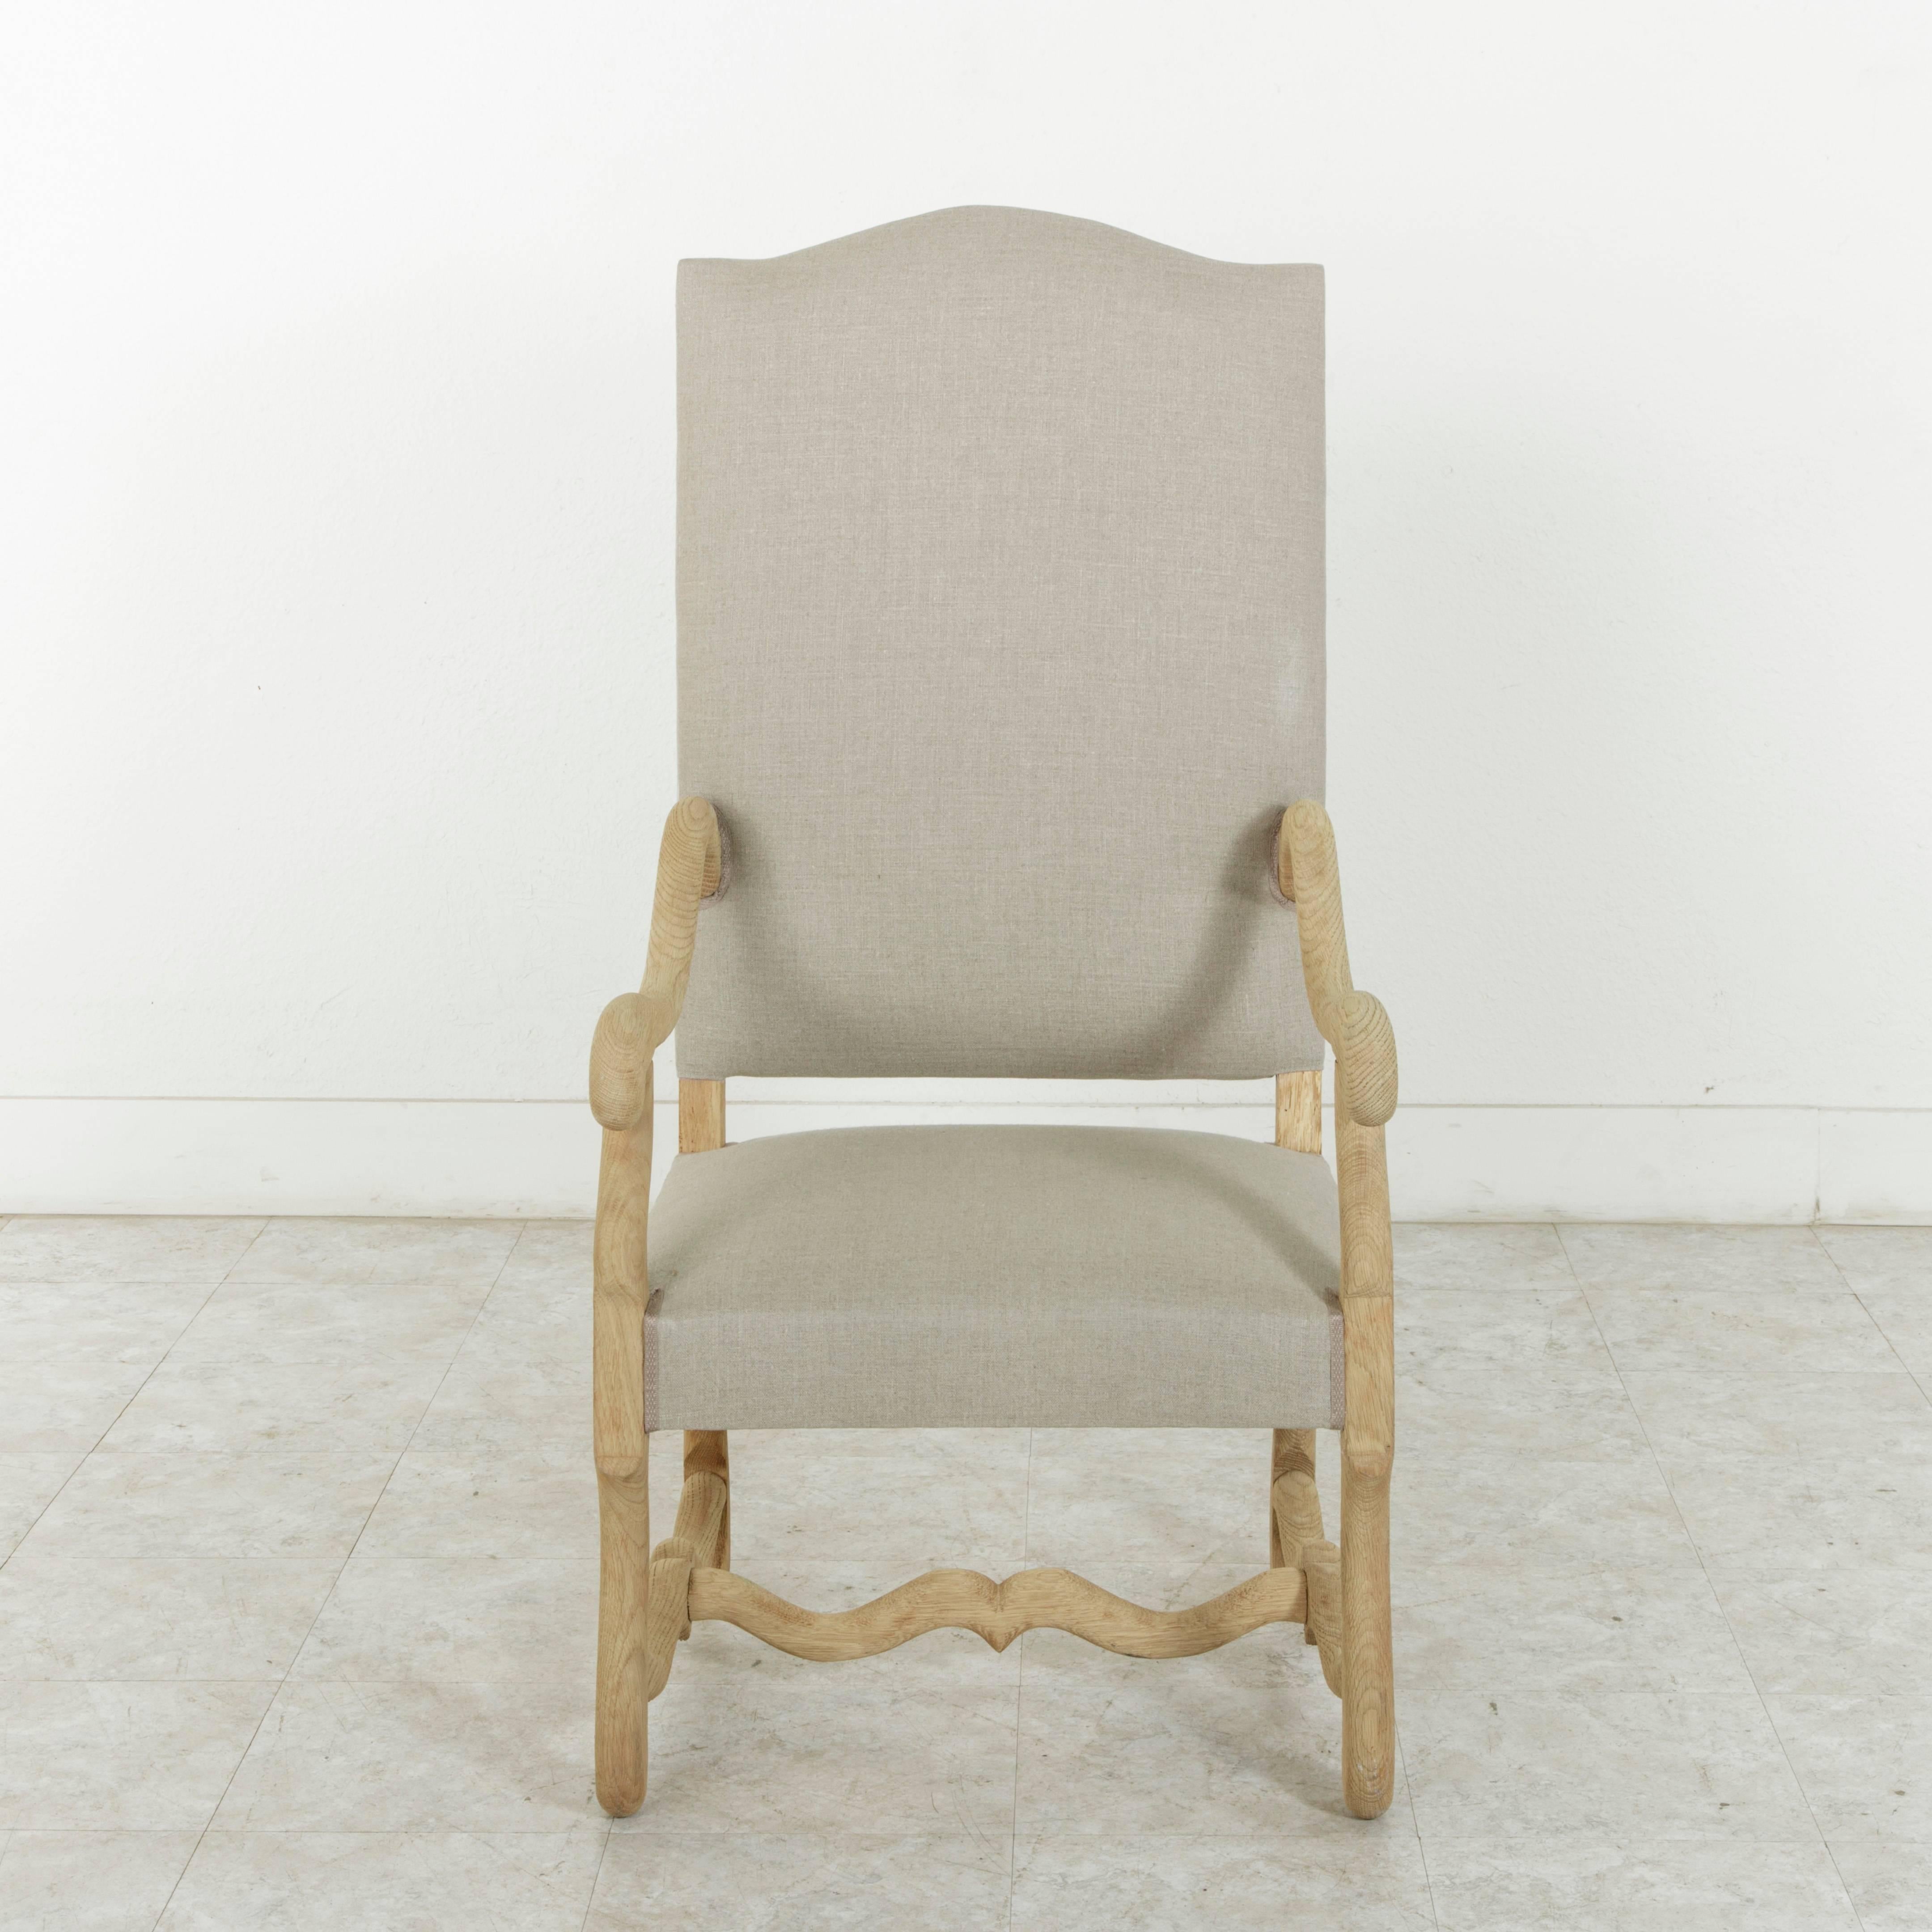 Newly upholstered in France in a beautiful neutral colored linen, this set of eight mutton leg dining chairs features six side chairs and two armchairs. The hand pegged, sturdy construction offers stability while the unfinished oak lend a light,